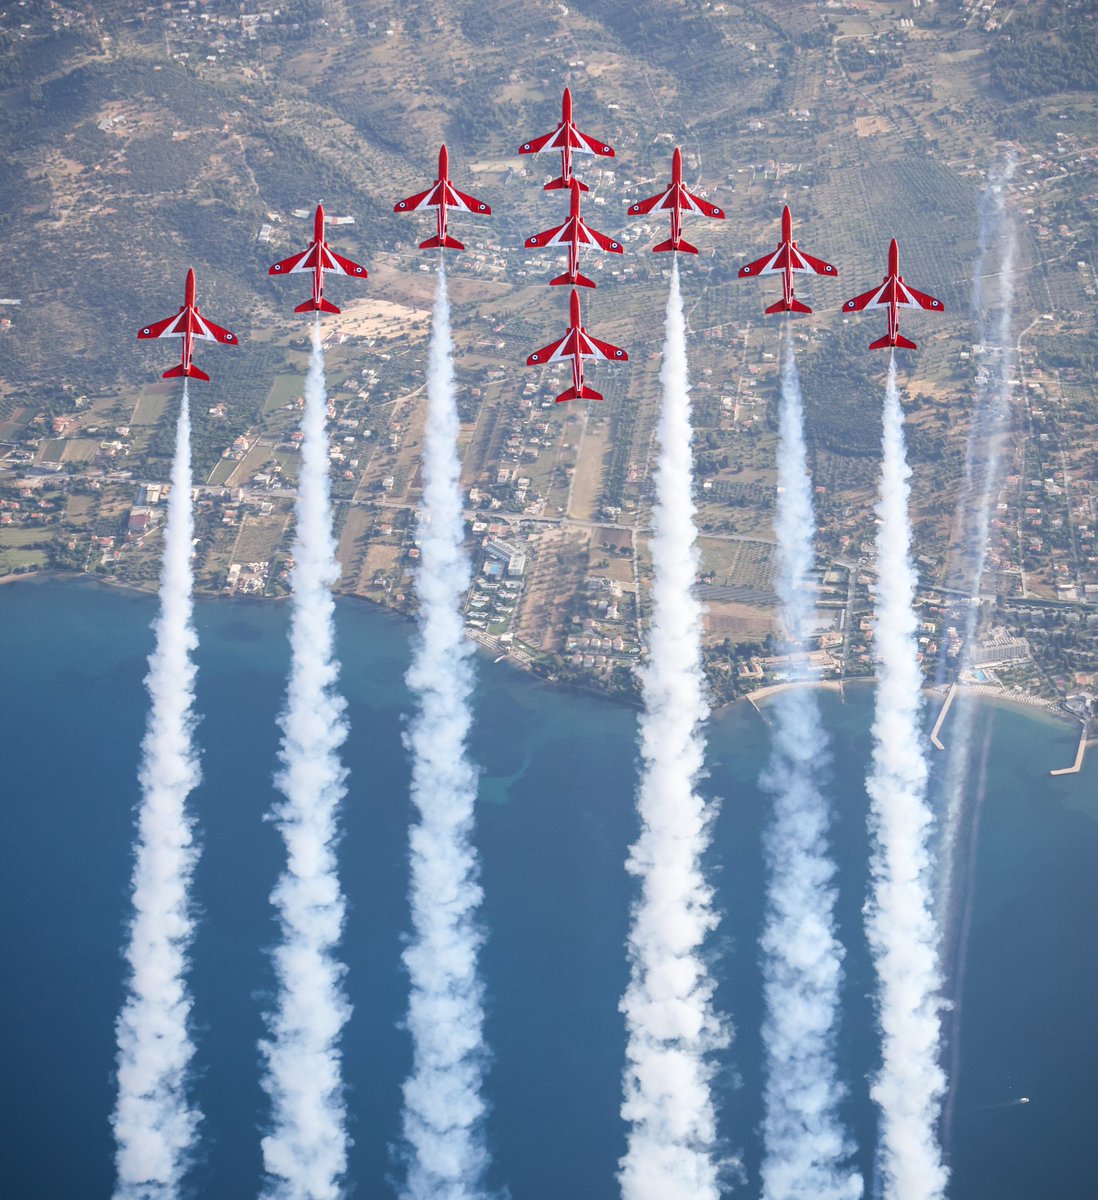 Top of the loop - all of the jets seen together during a pre-season training sortie in Greece. #RedArrows 📸 Cpl Phil Dye